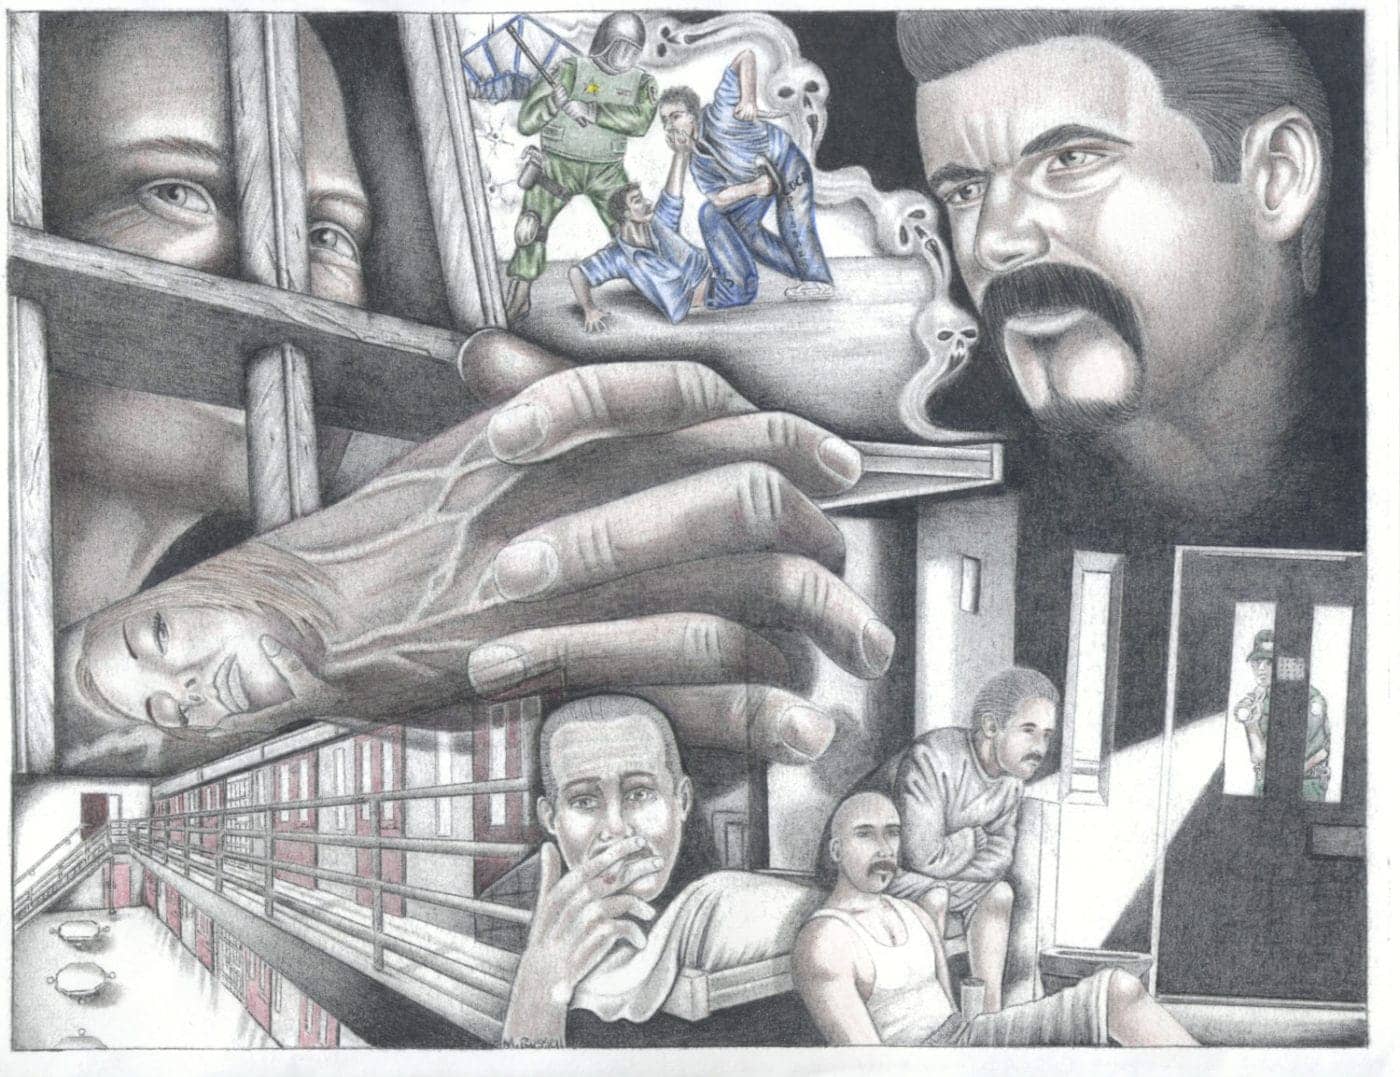 Everyday-Life-in-Californias-Level-4-Prisons-art-by-Michael-D.-Russell-1400x1077, Who really is the ‘Worst of the Worst’?, Behind Enemy Lines 